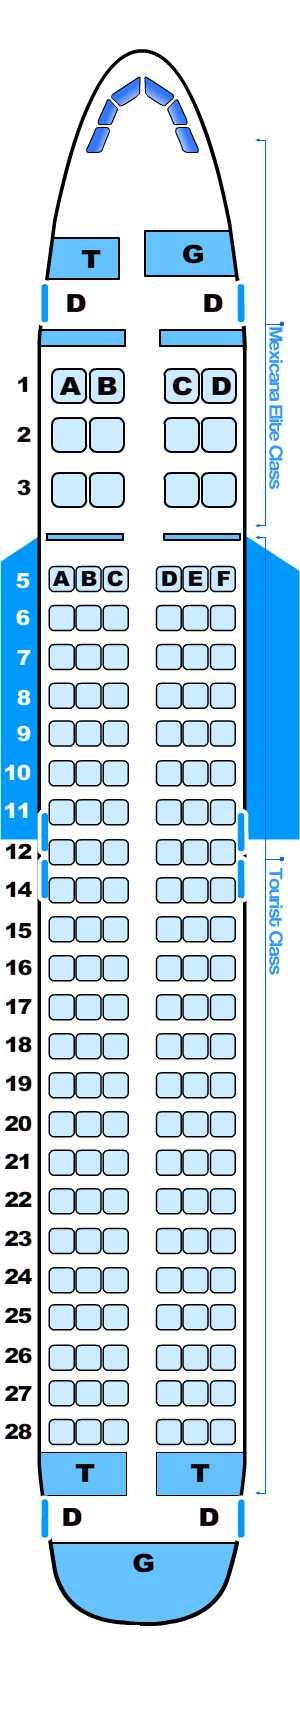 Seat map for Airbus A320 200